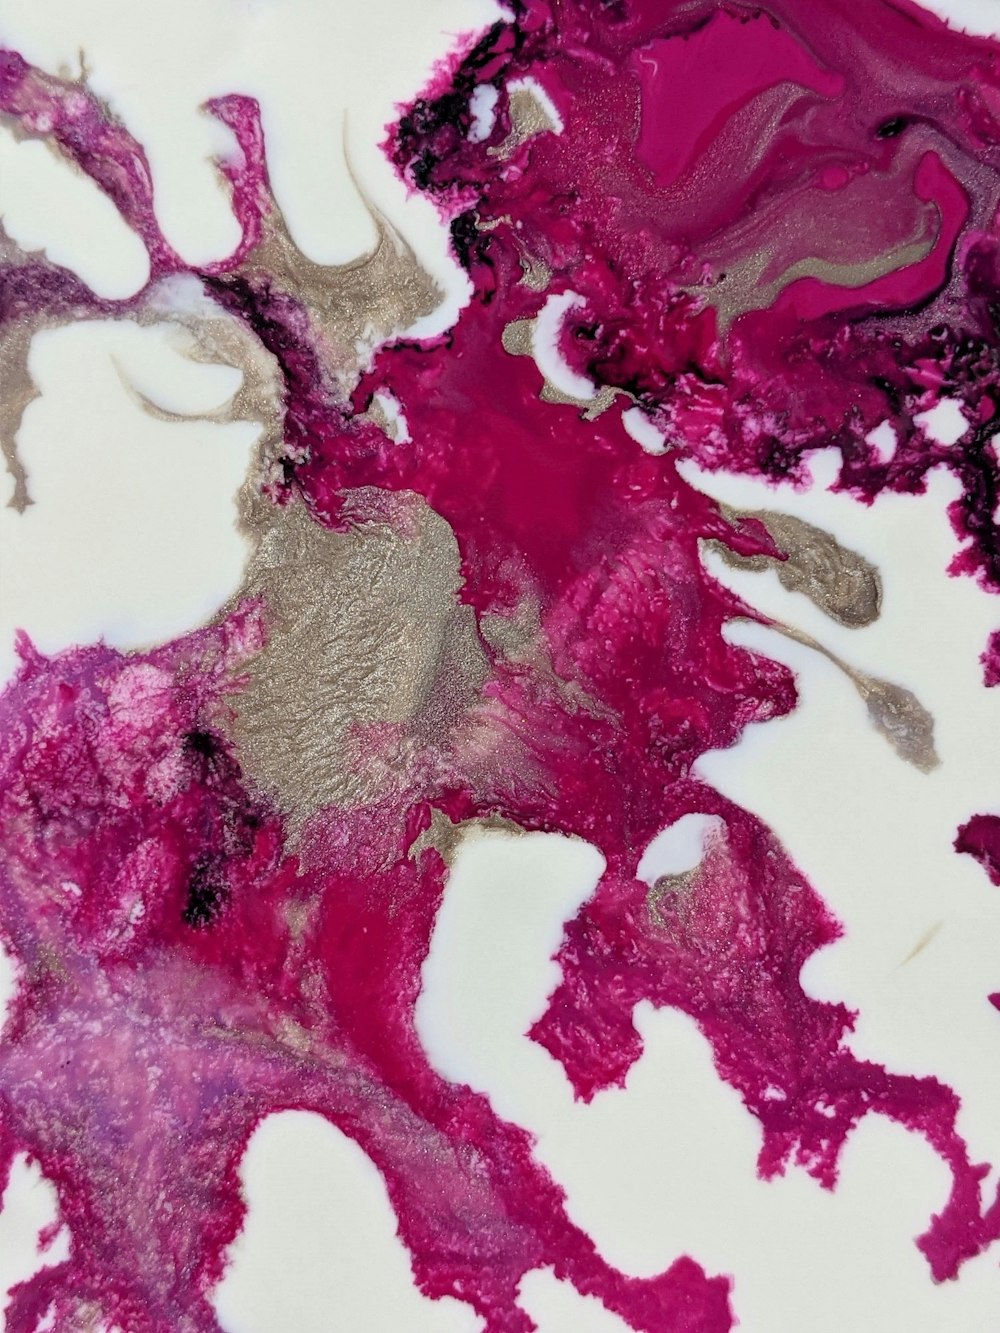 a close up of a white and purple substance